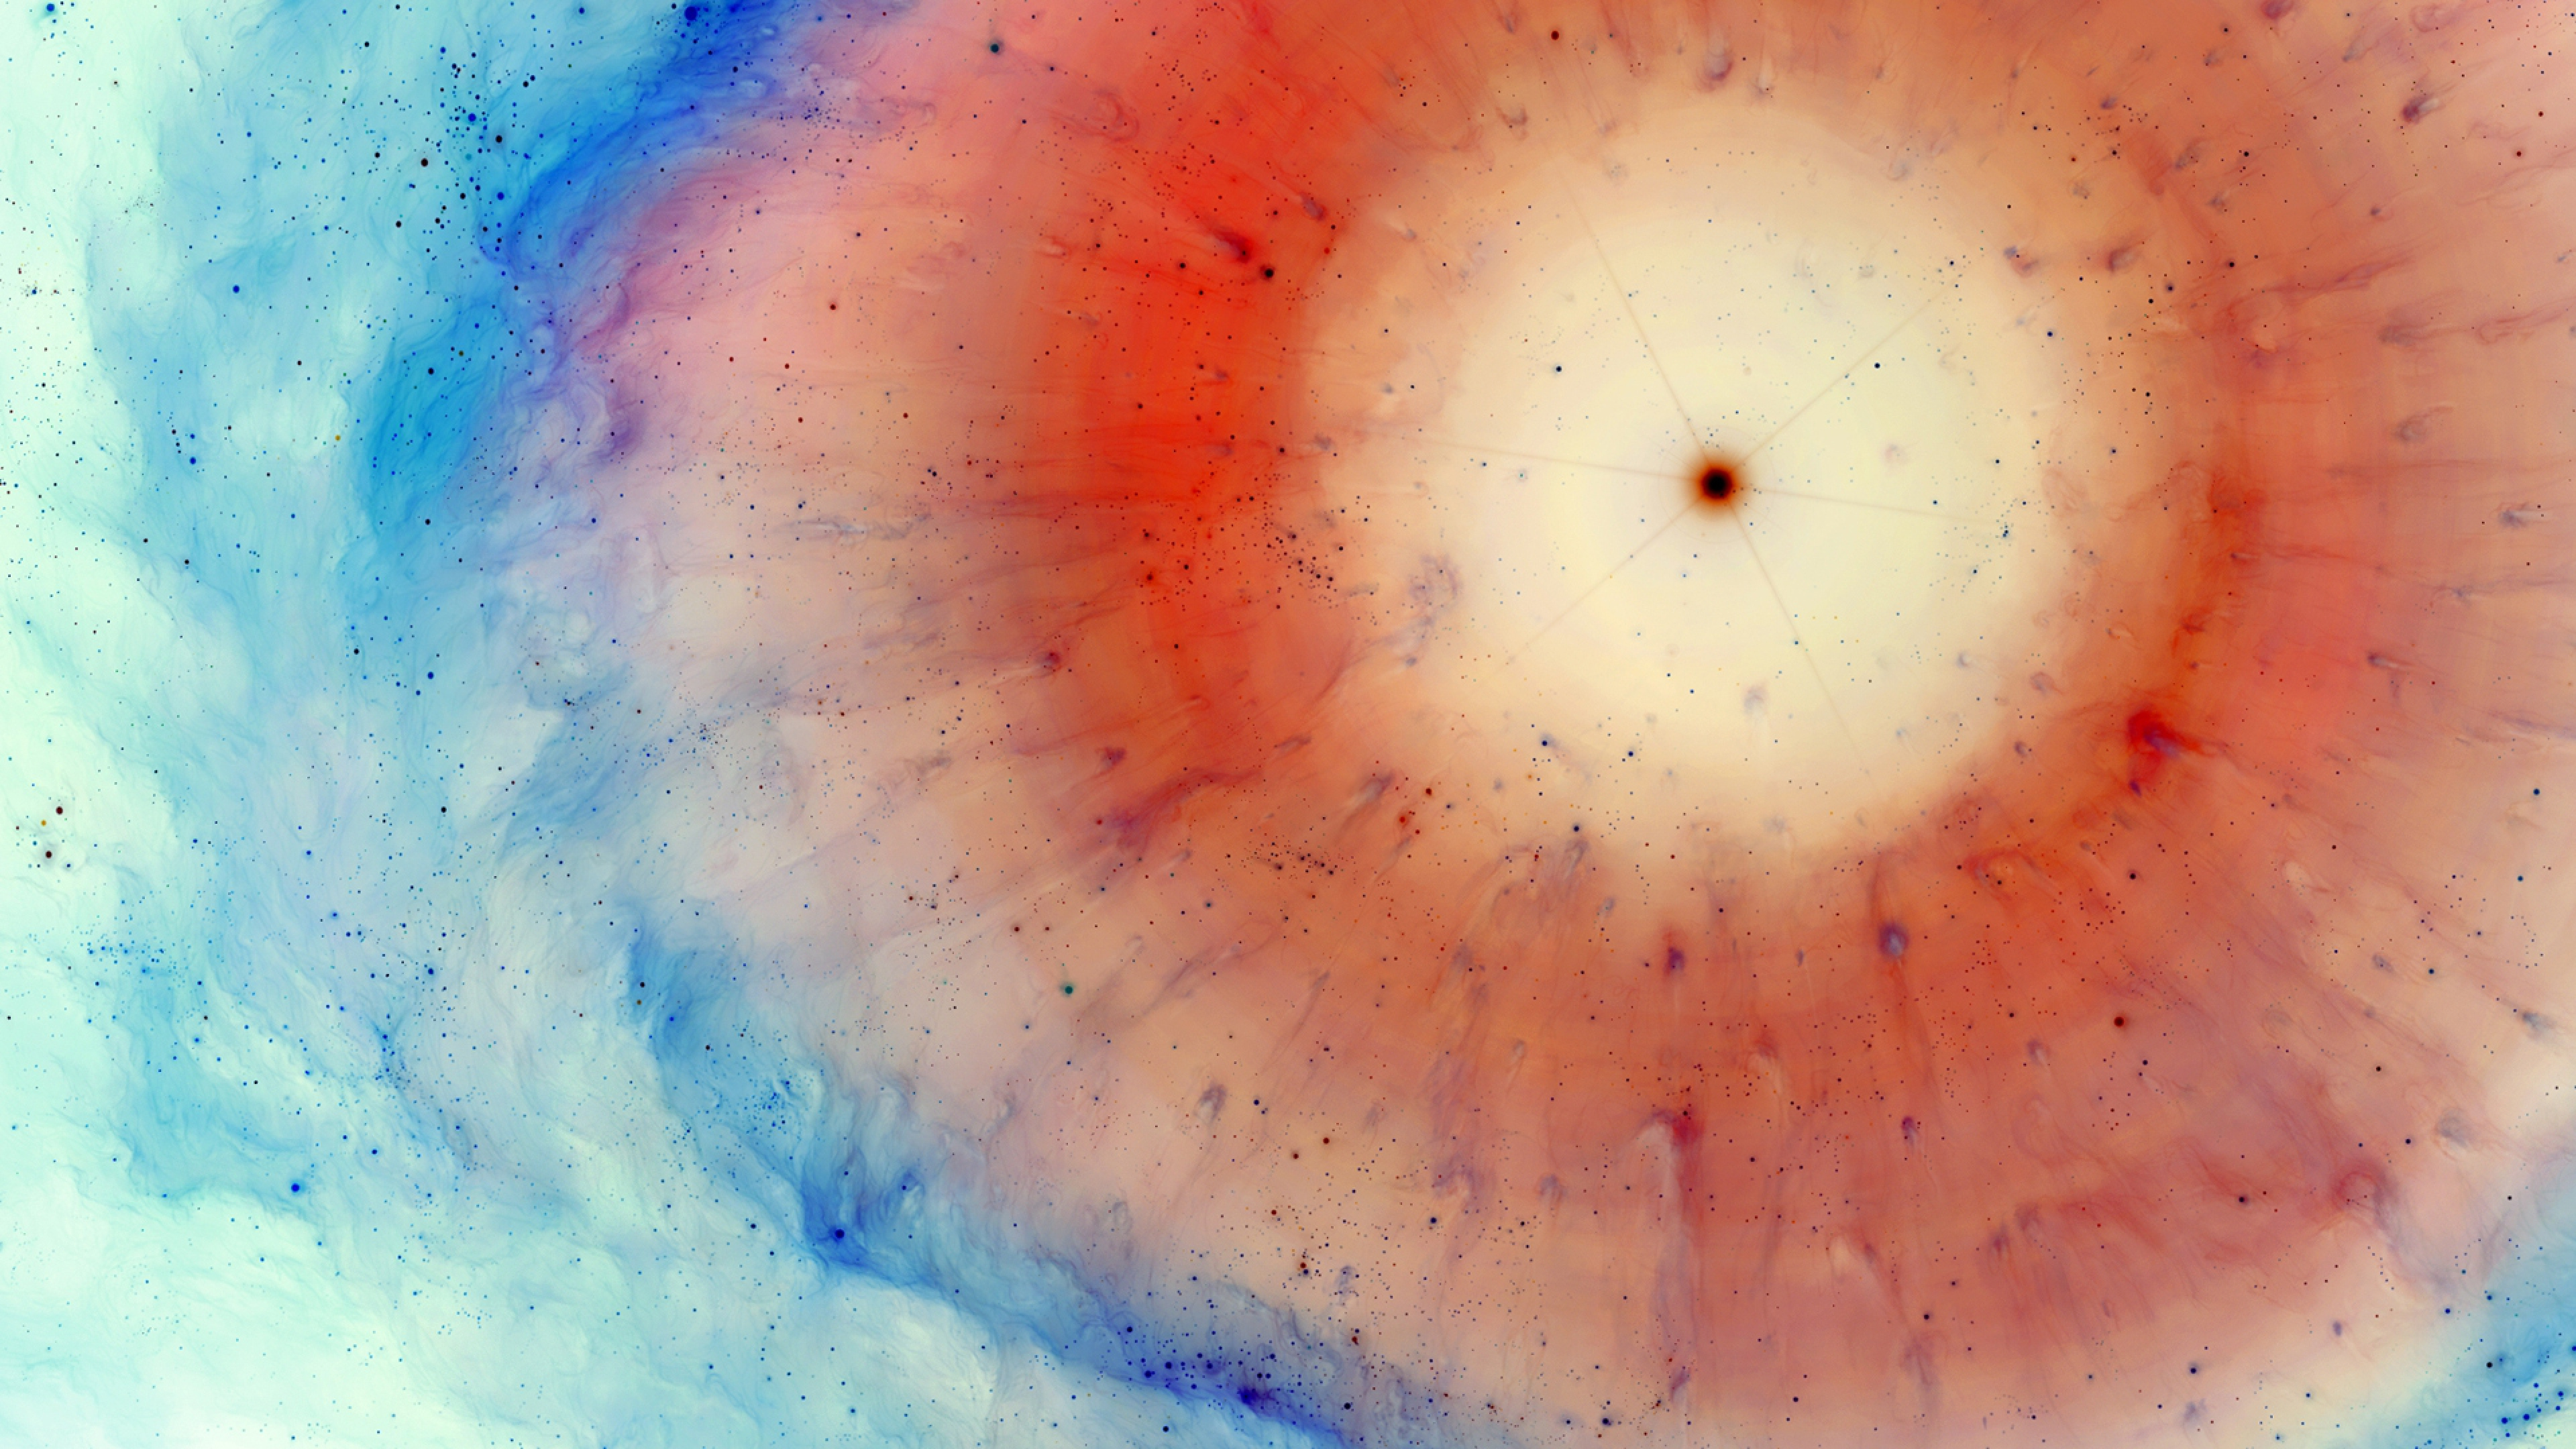 The helix nebula reveals the final stage in the life of a star like our sun